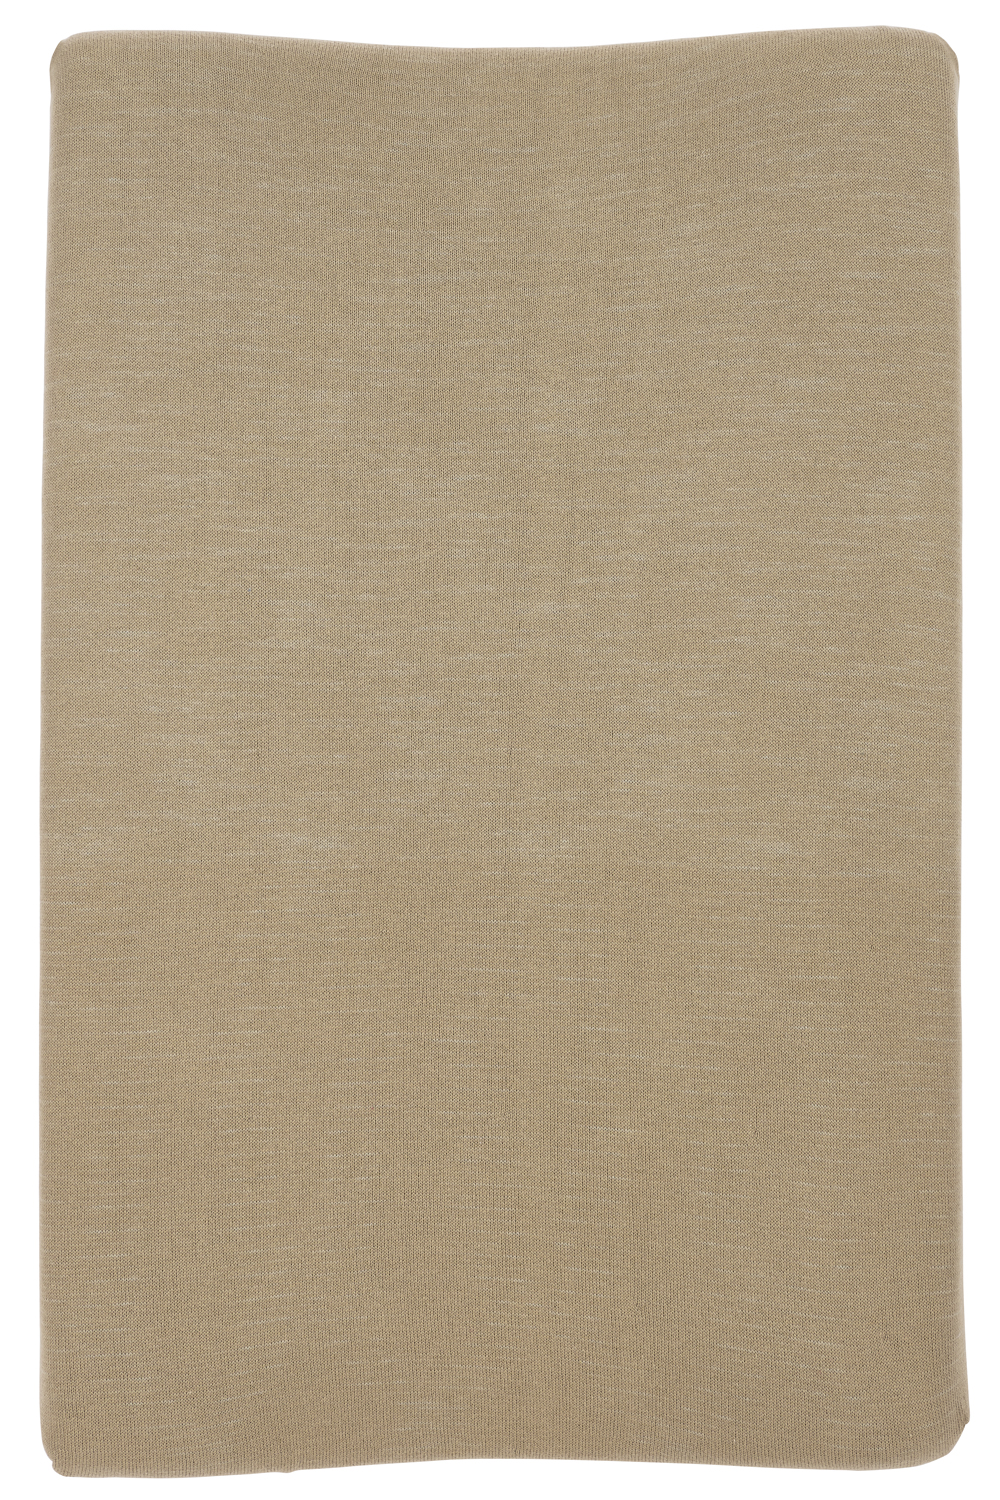 Aankleedkussenhoes Knit Basic - Taupe - 50x70cm